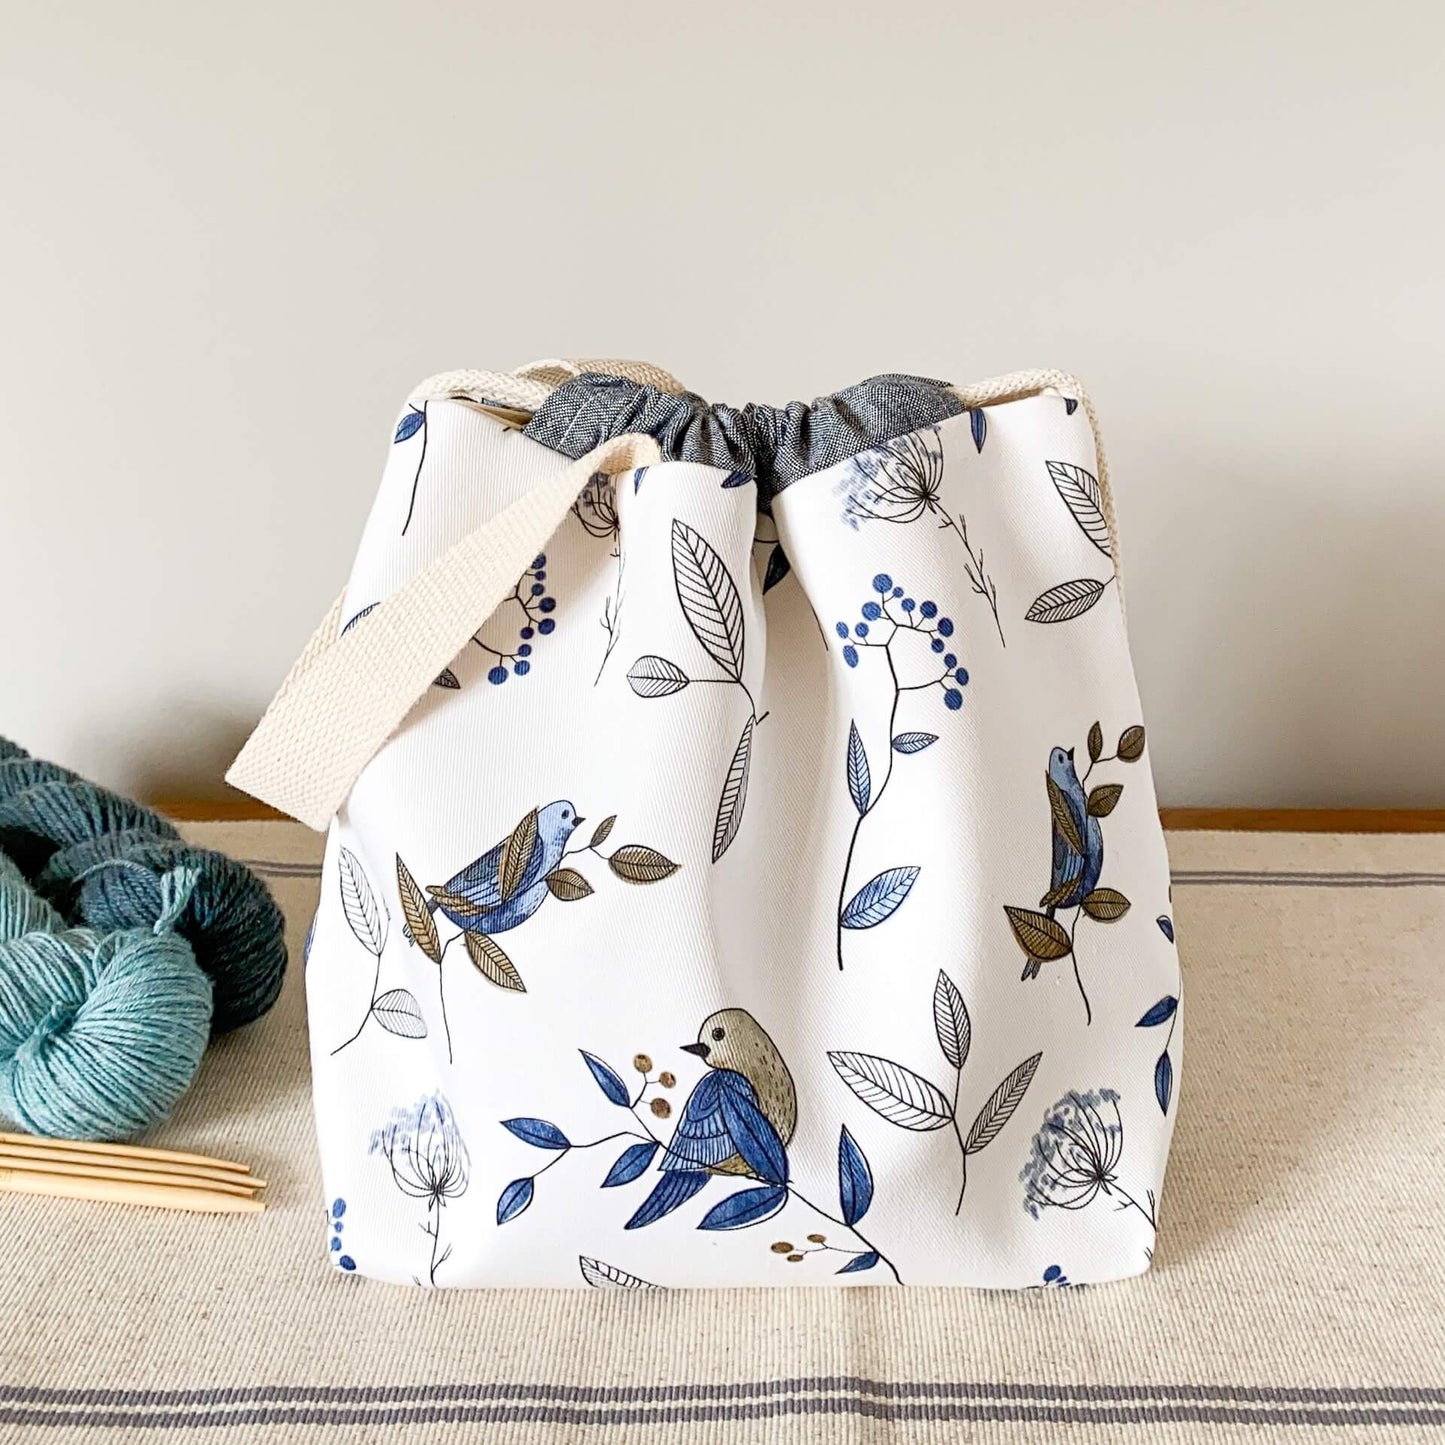 A project bag sits on a table next to skeins of yarn. It is made from a fabric that has been printed with blue birds sitting on branches. 